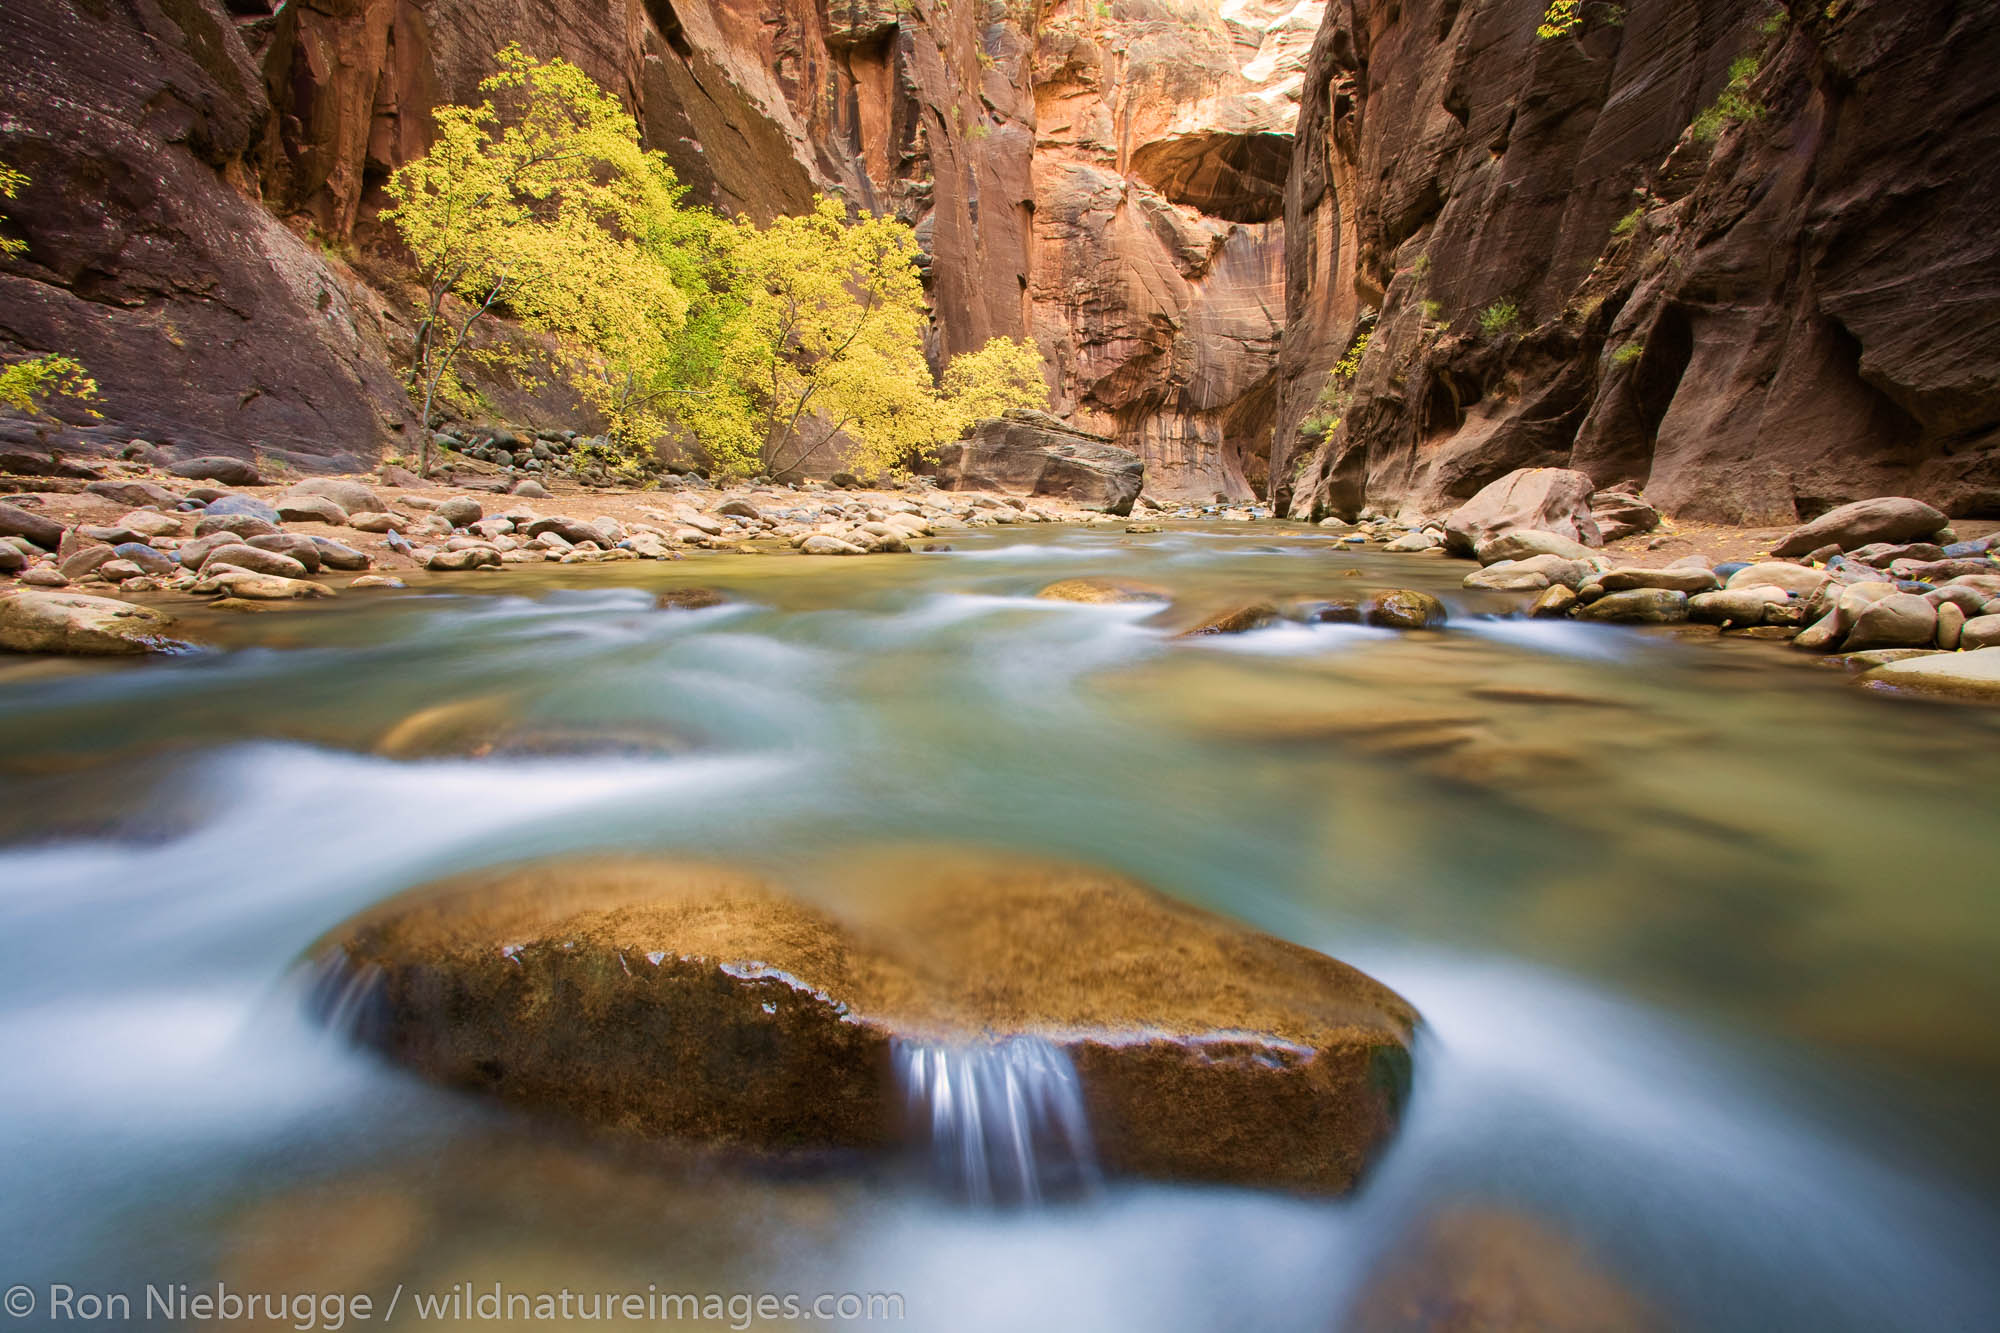 The Virgin River in the Zion Narrows, Zion National Park, Utah.